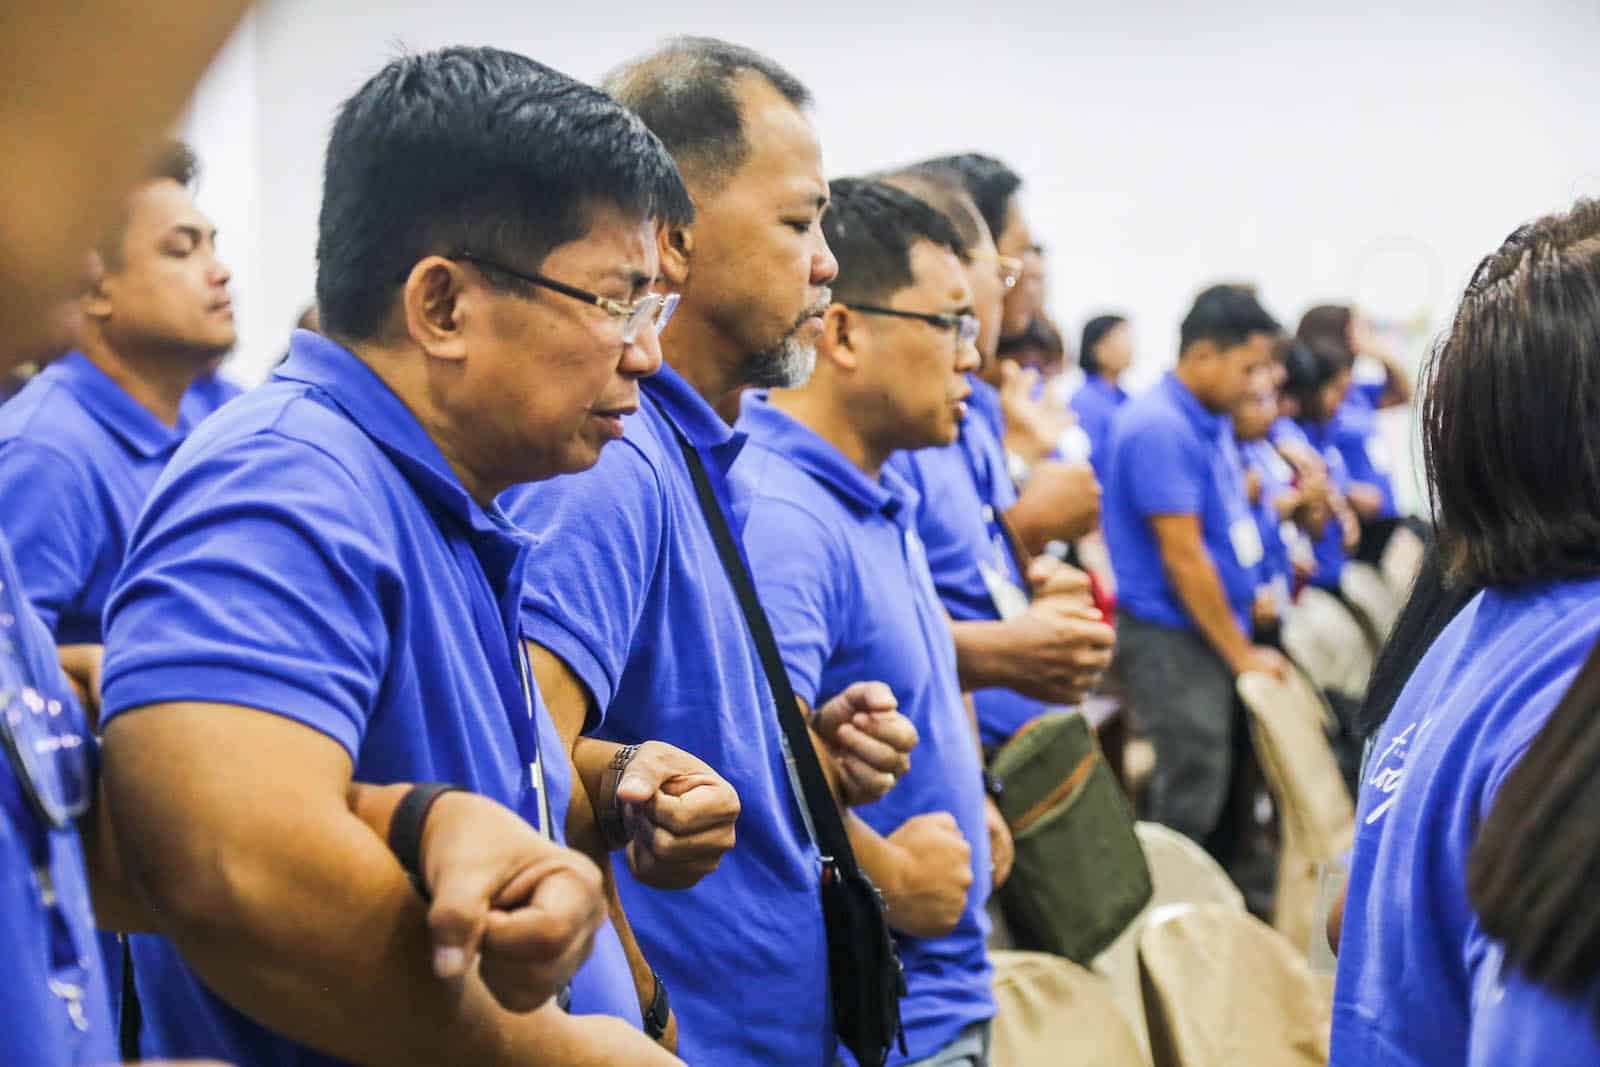 A row of men in blue shirts, linking arms and praying against child sexual abuse.